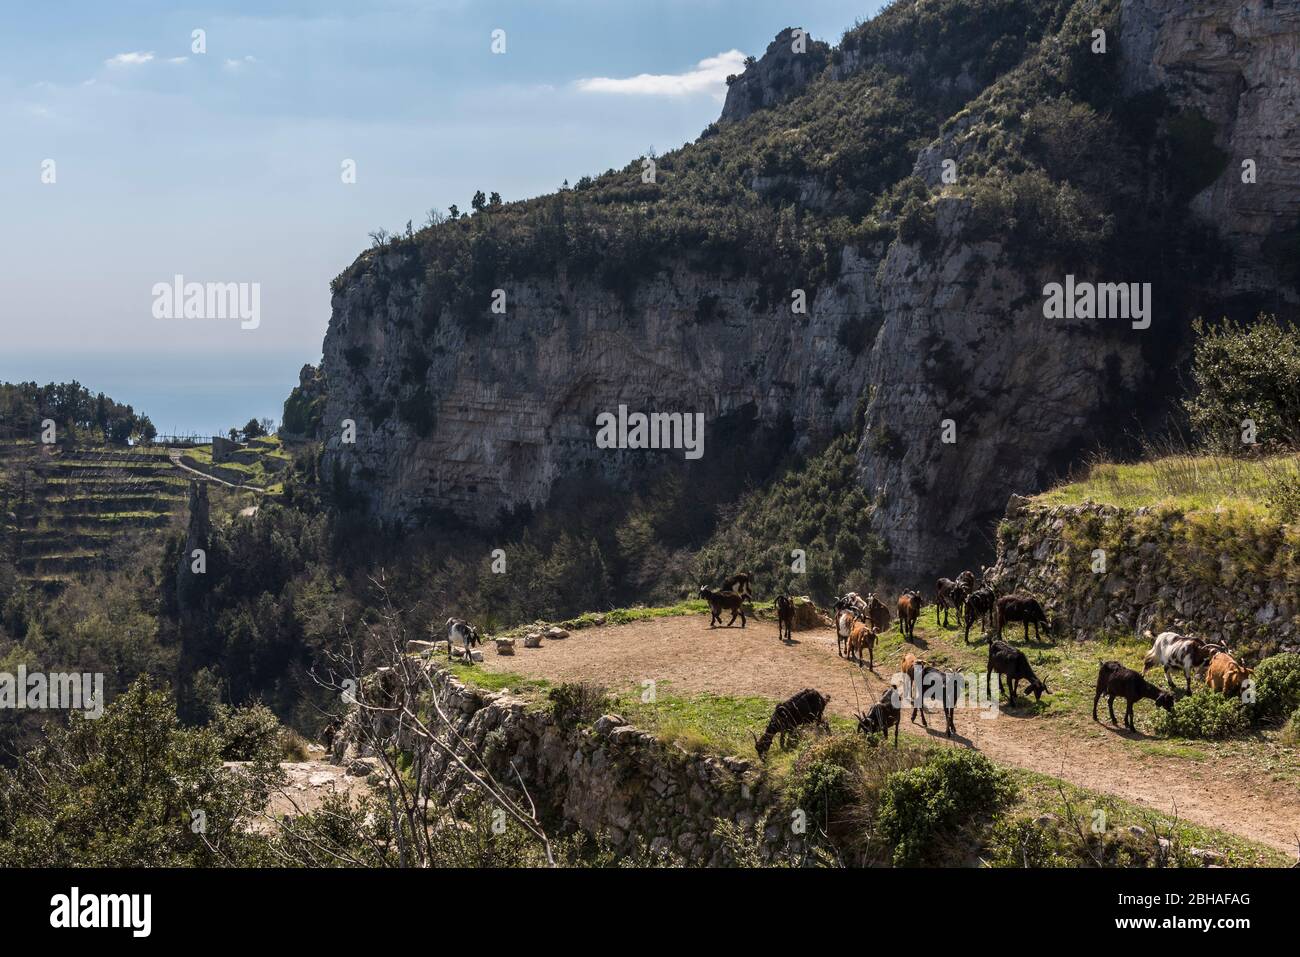 The Way of the Gods: Sentiero degli Dei. Incredibly beautiful hiking path high above the Amalfitana or Amalfi coast in Italy, from Agerola to Positano. March 2019. Goat herd Stock Photo